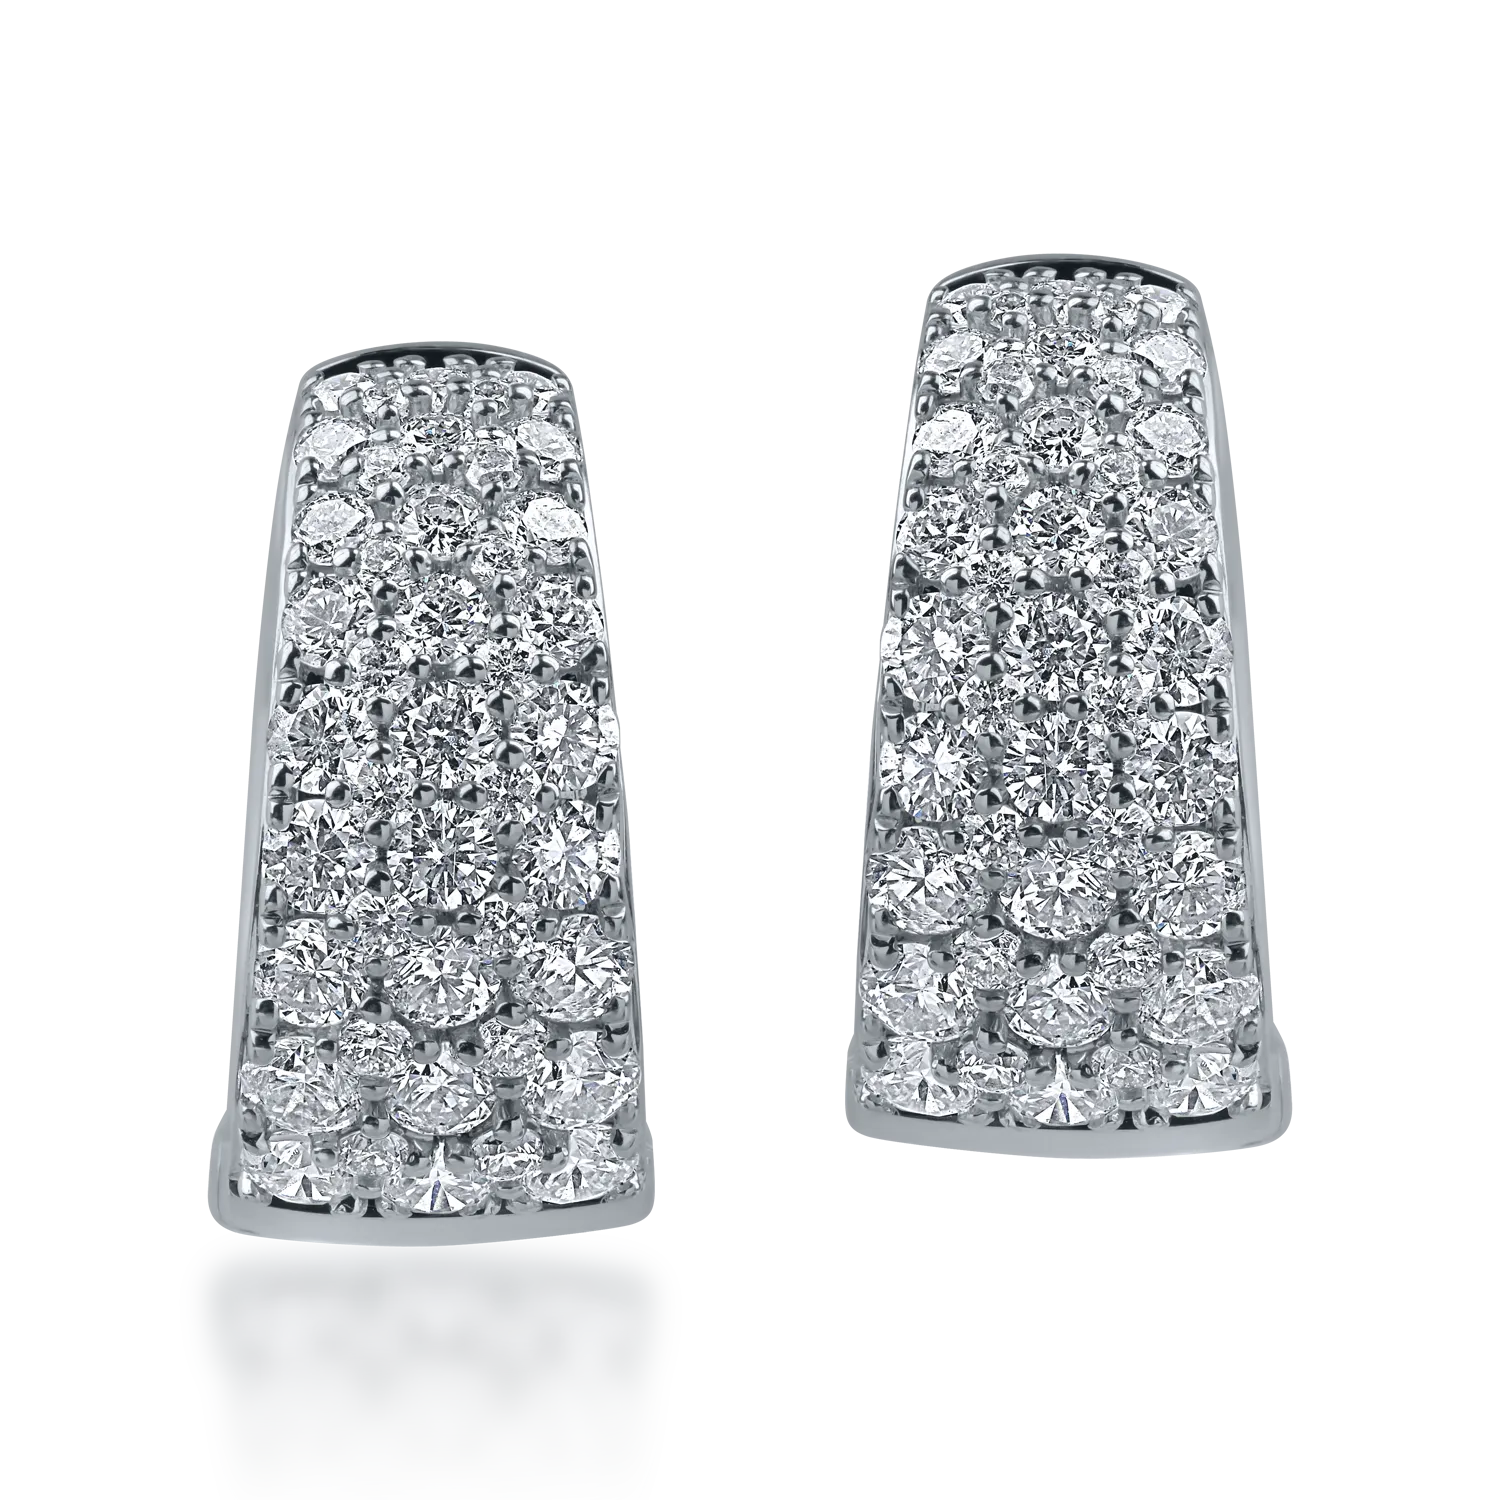 White gold earrings with 1.19ct diamonds